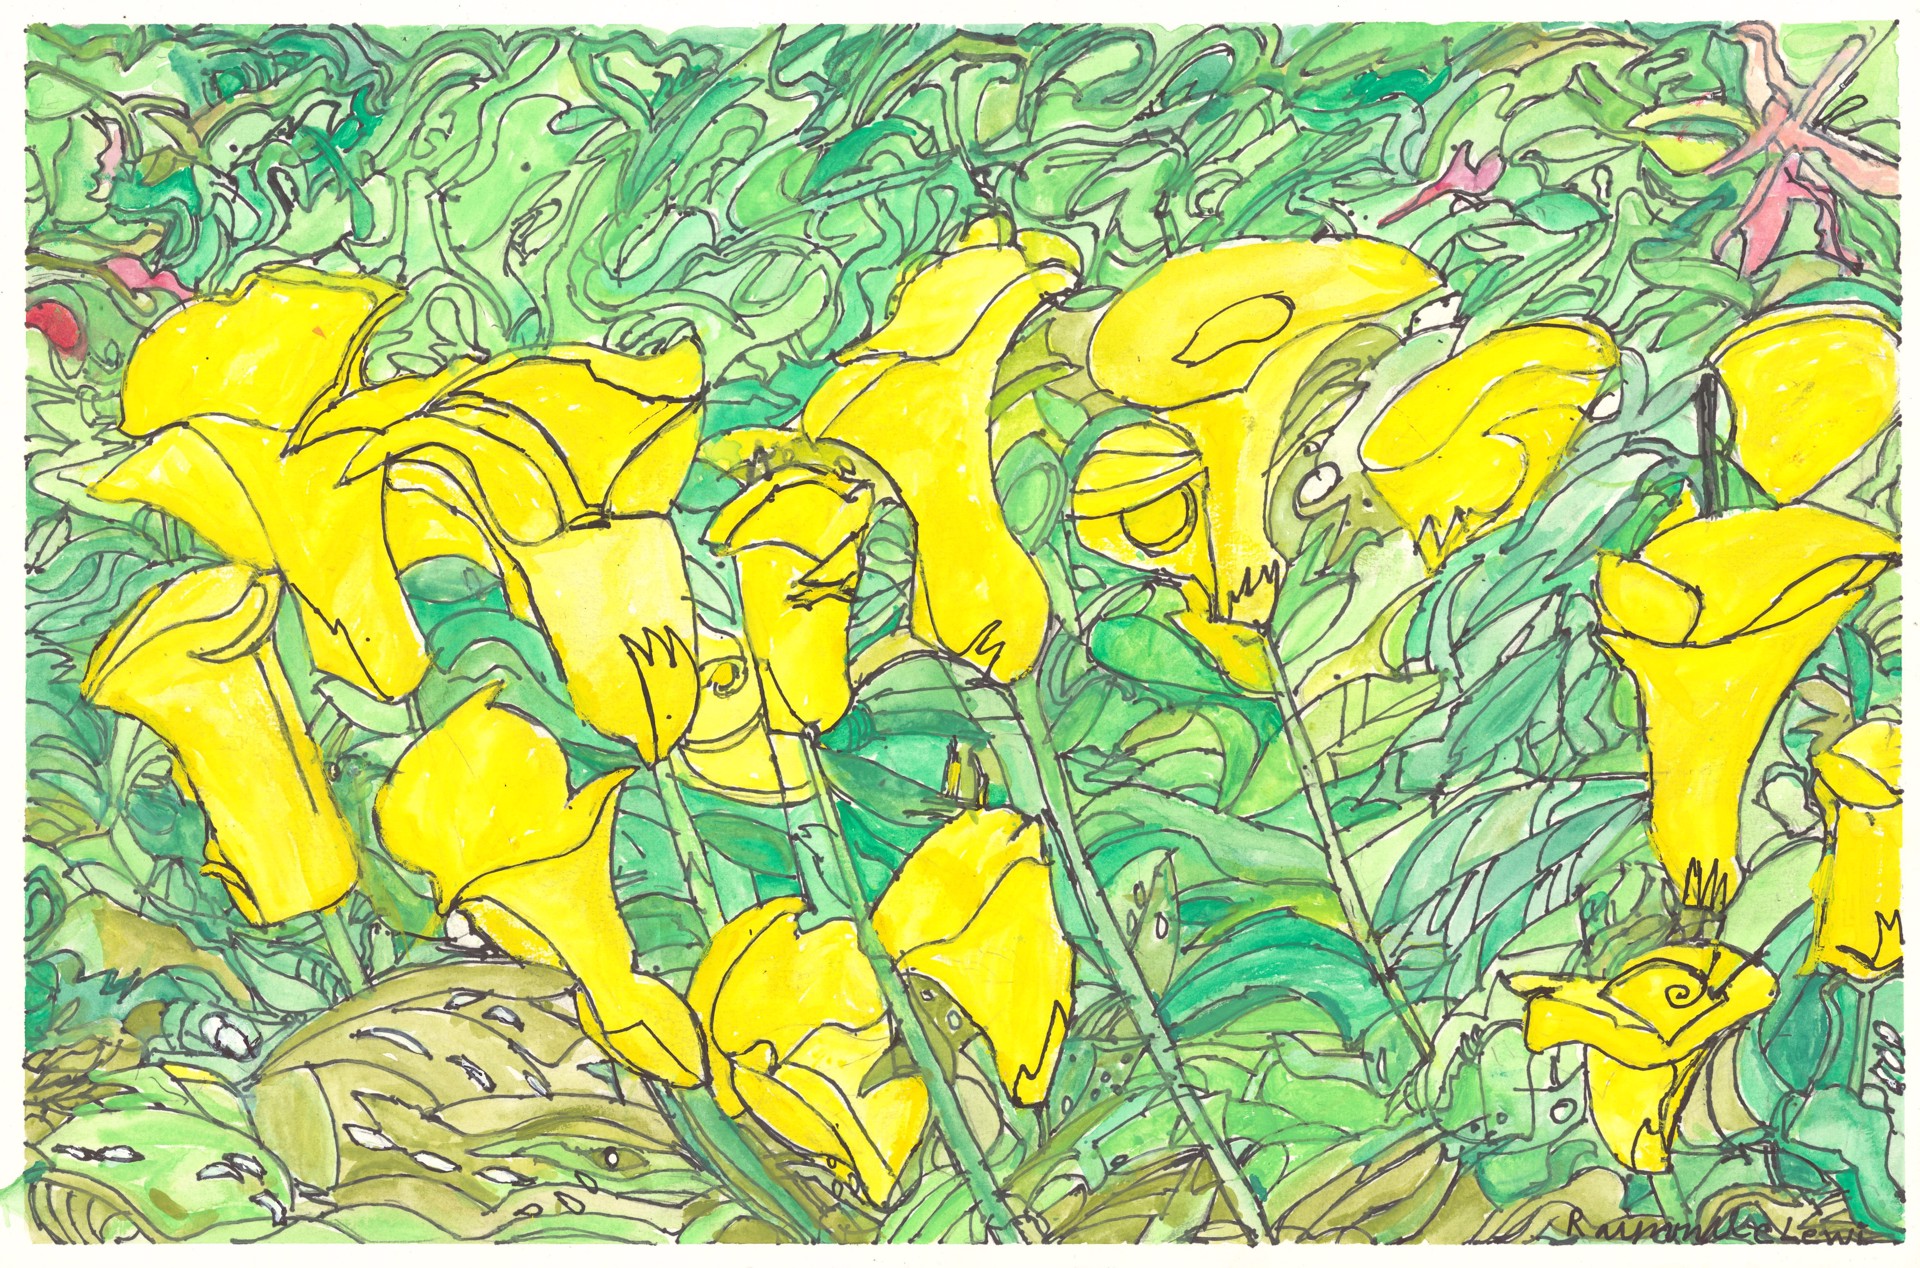 Yellow Flowers in the Summertime by Raymond Lewis